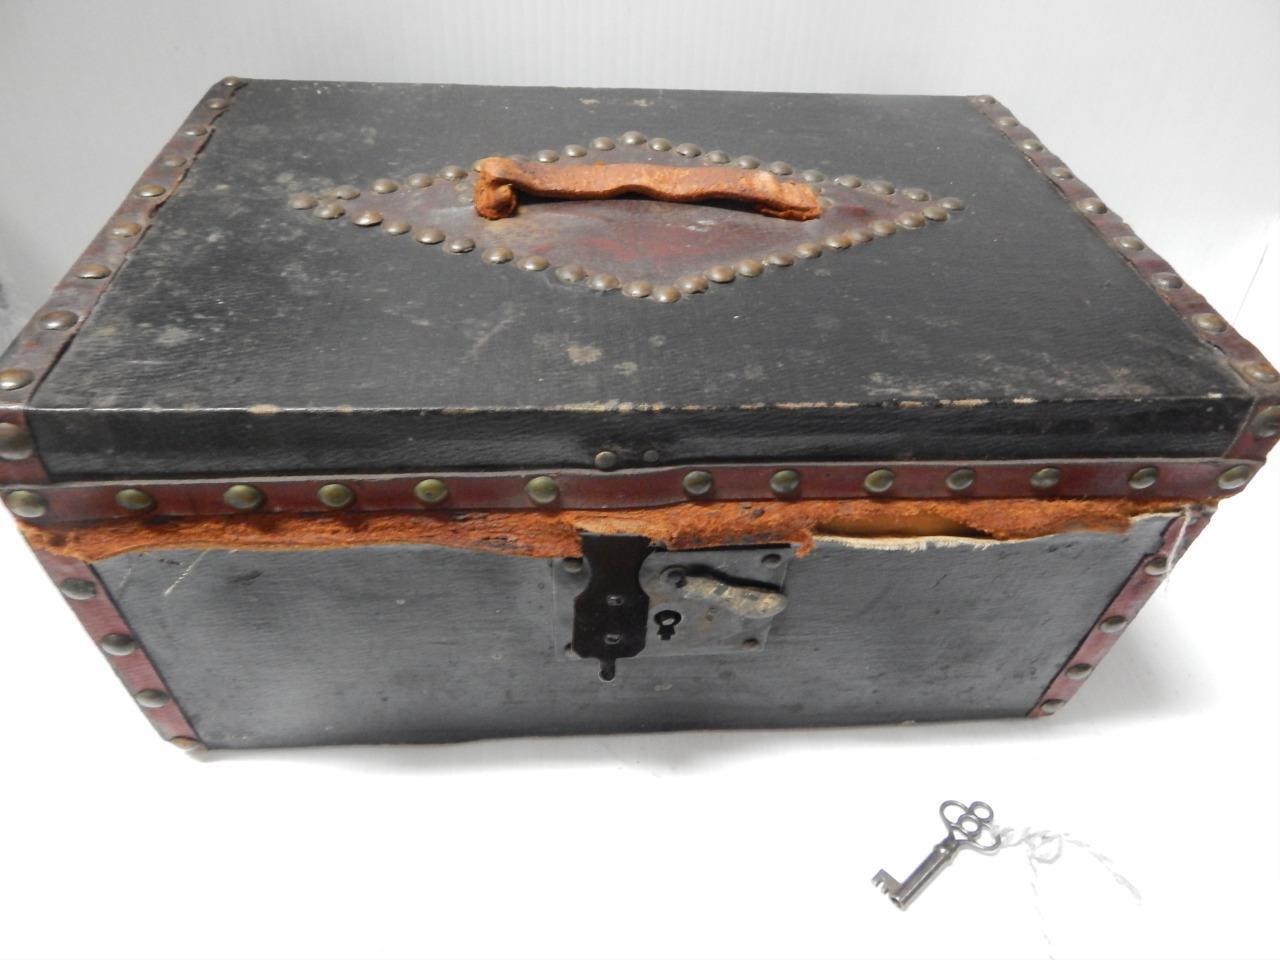 MID 1800s ANTIQUE PRIMITIVE STAGECOACH / DOCUMENT BOX LEATHER COVERED + STUDDED